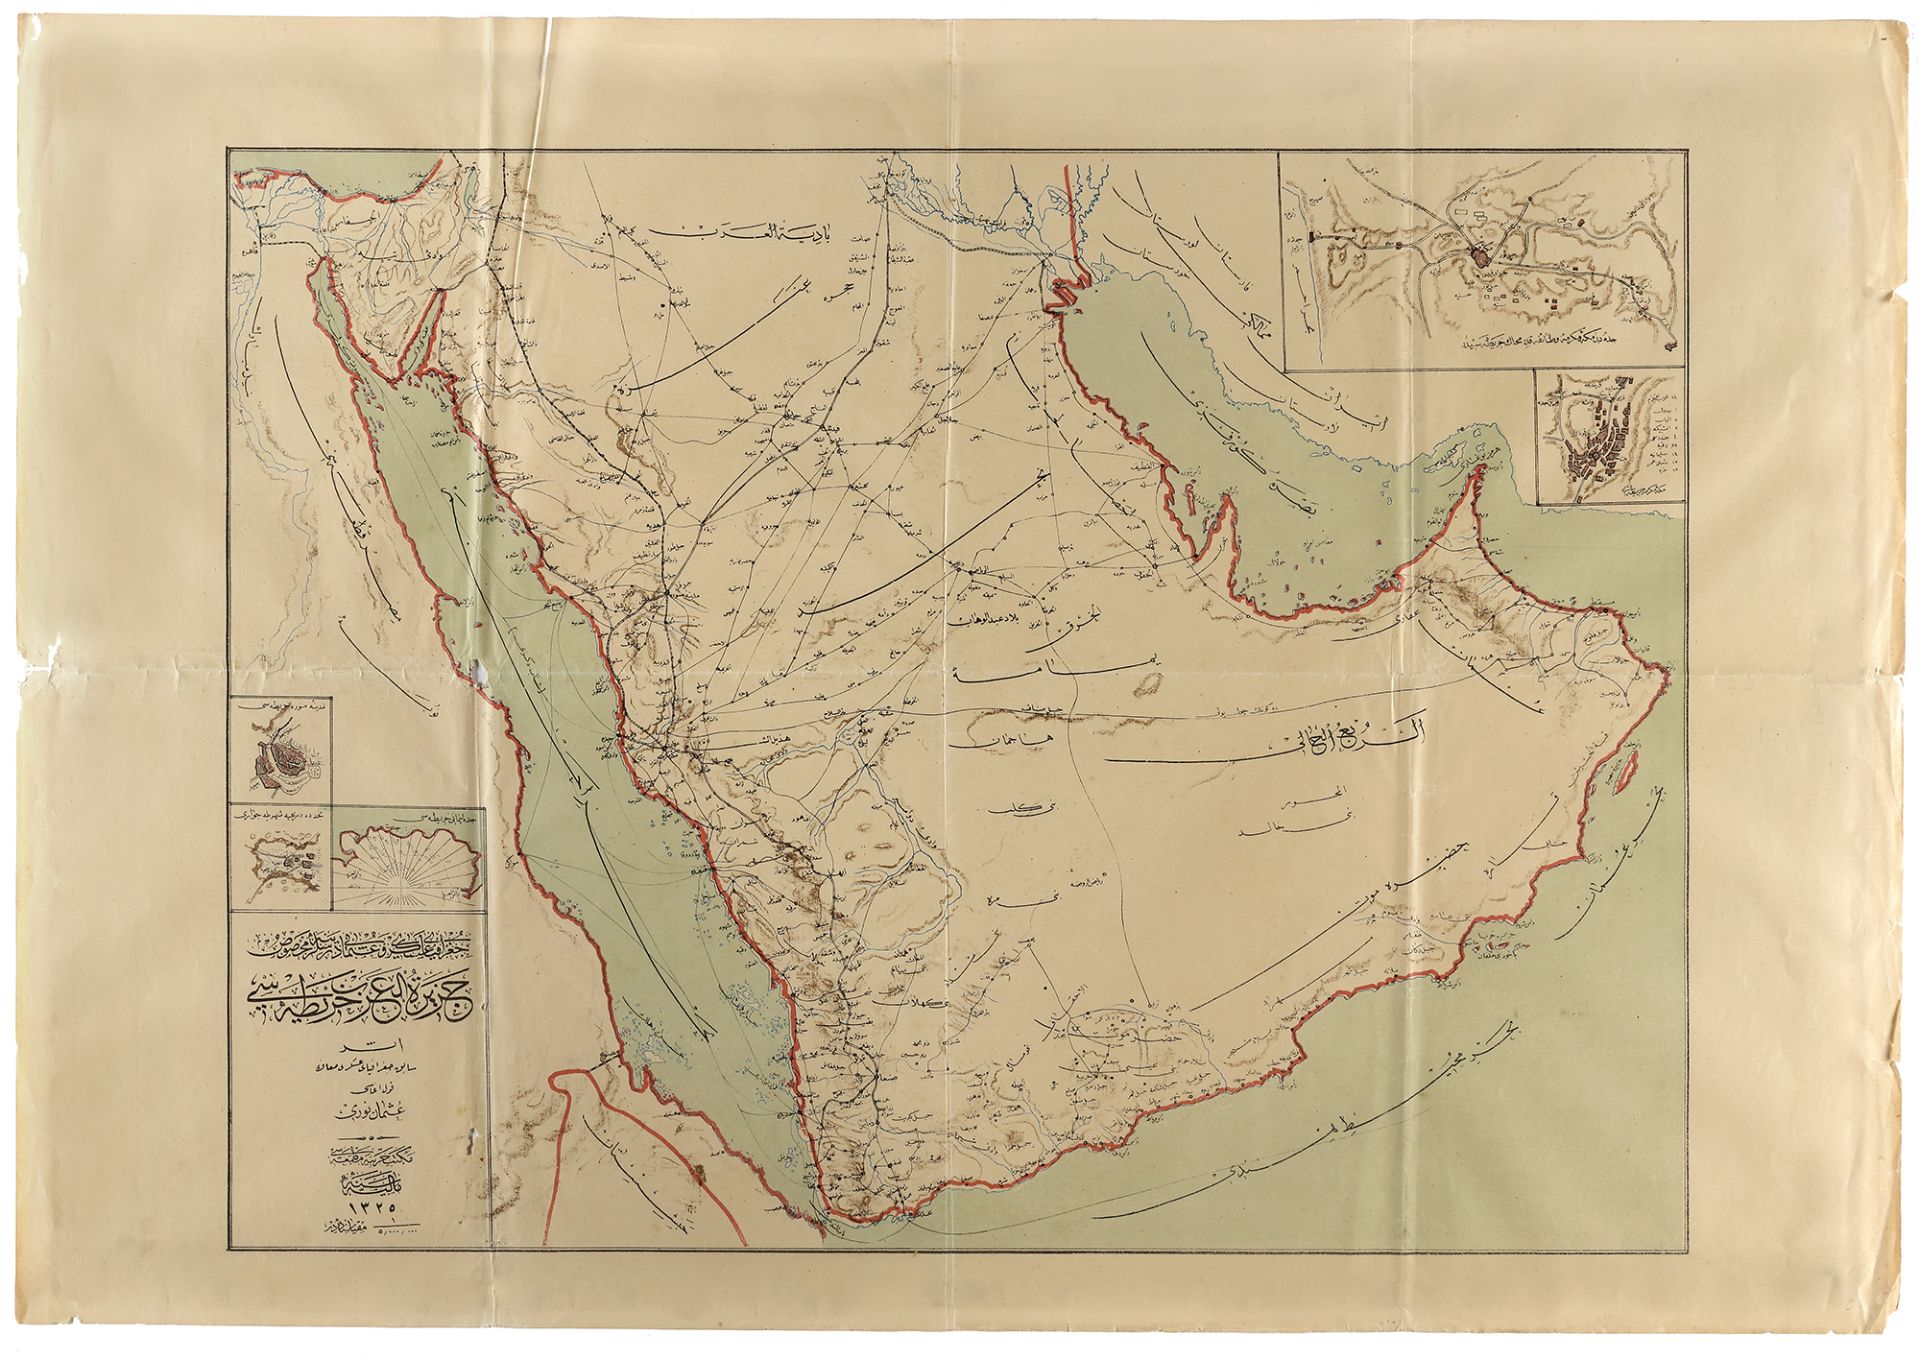 AN IMPORTANT DETAILED MILITARY OTTOMAN MAP OF THE ARABIAN PENINSULA, ESPECIALLY DIR’IYAH, DATED 1325